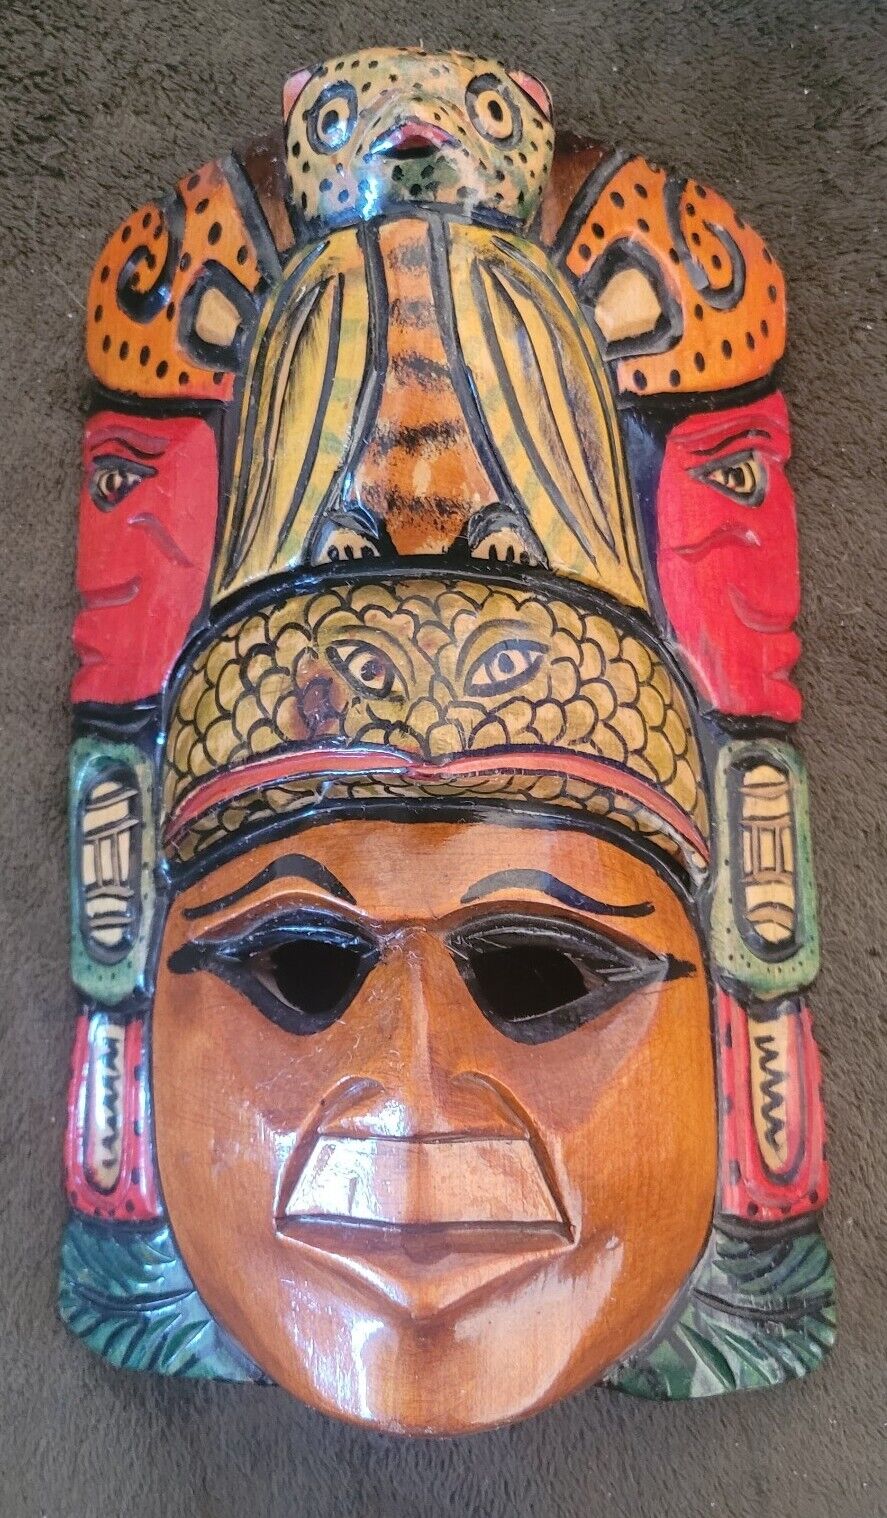 Vintage Handcrafted South American Tribal Mask Wood Colorful Handmade Wall Decor